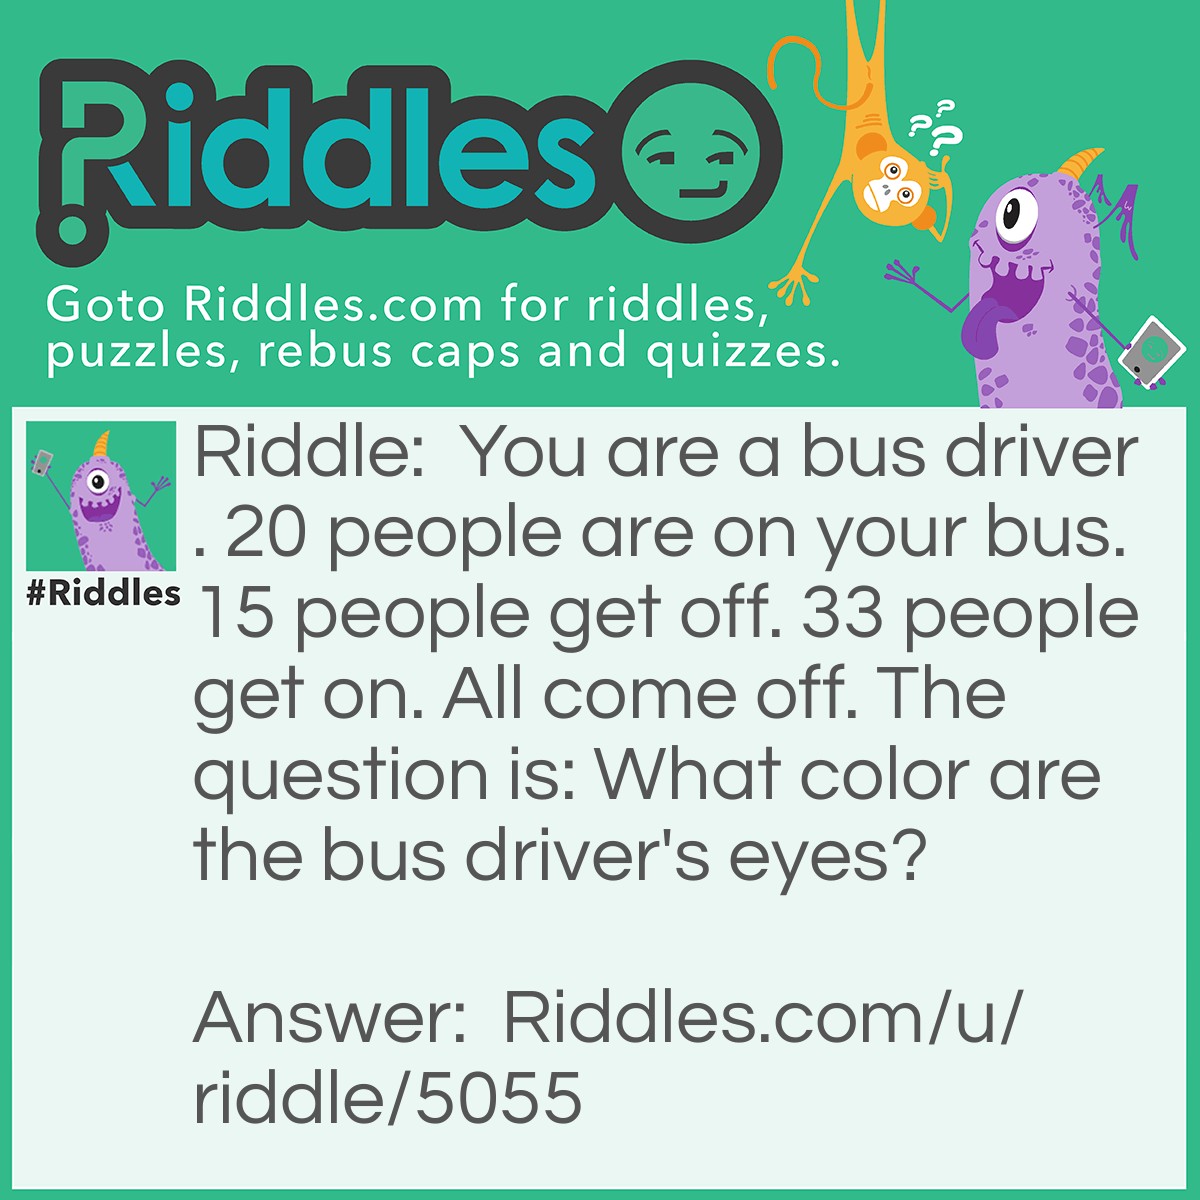 Riddle: You are a bus driver. 20 people are on your bus. 15 people get off. 33 people get on. All come off. The question is: What color are the bus driver's eyes? Answer: Whatever YOUR eye color is!